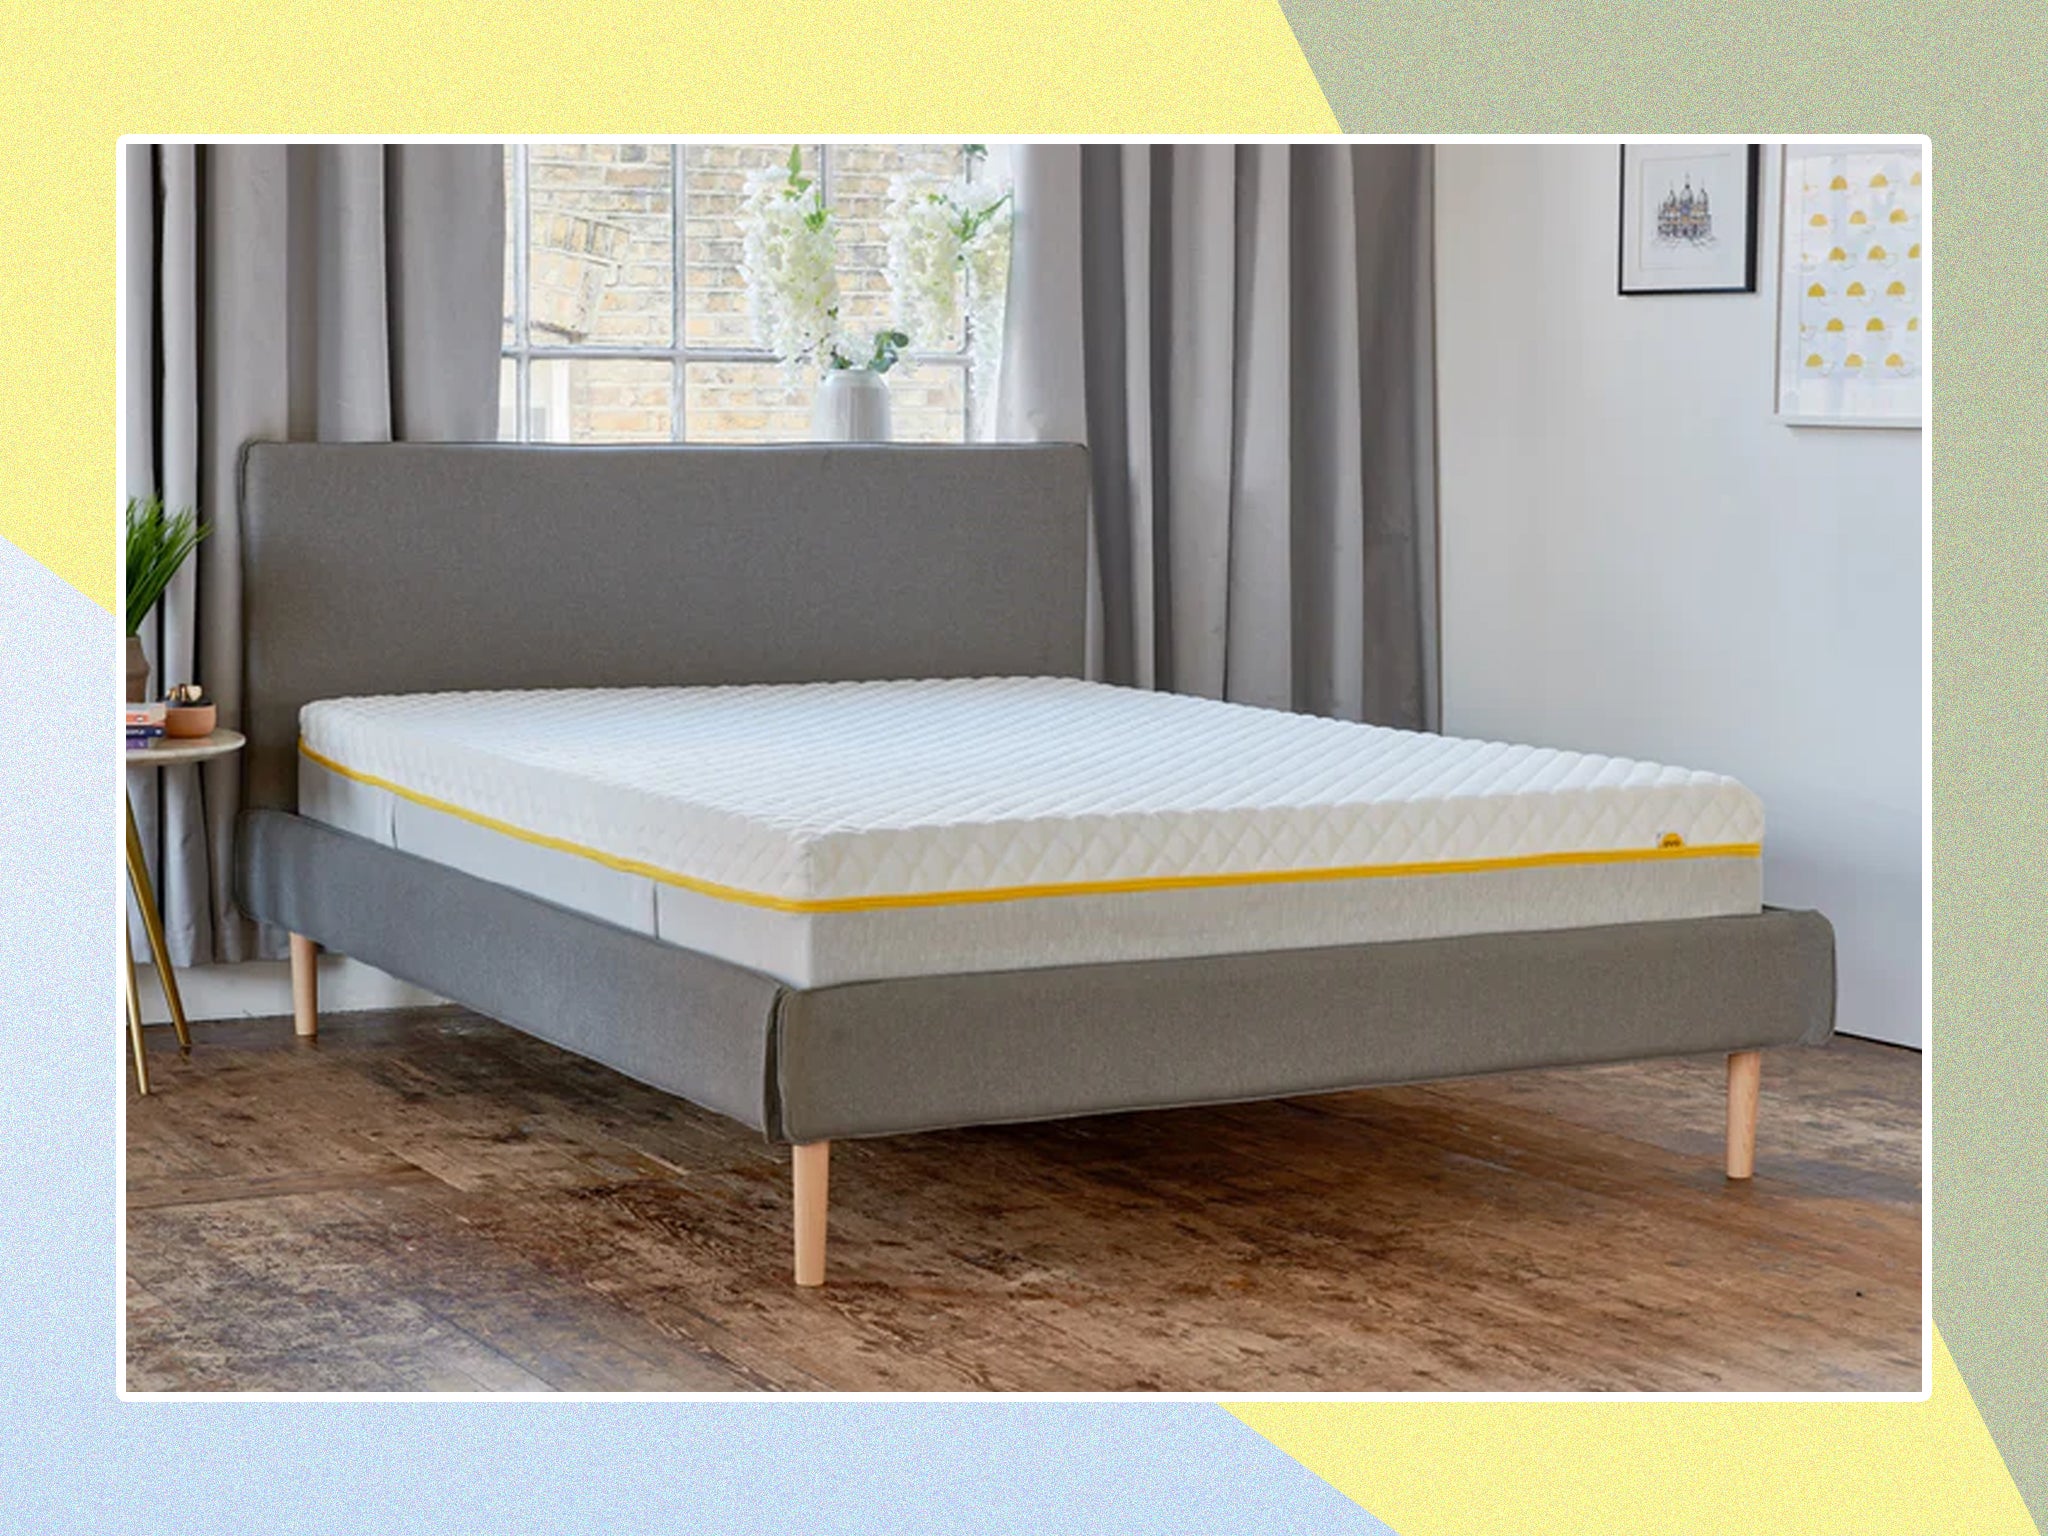 Eve premium hybrid mattress review: Could this be the answer to your sleepless nights?